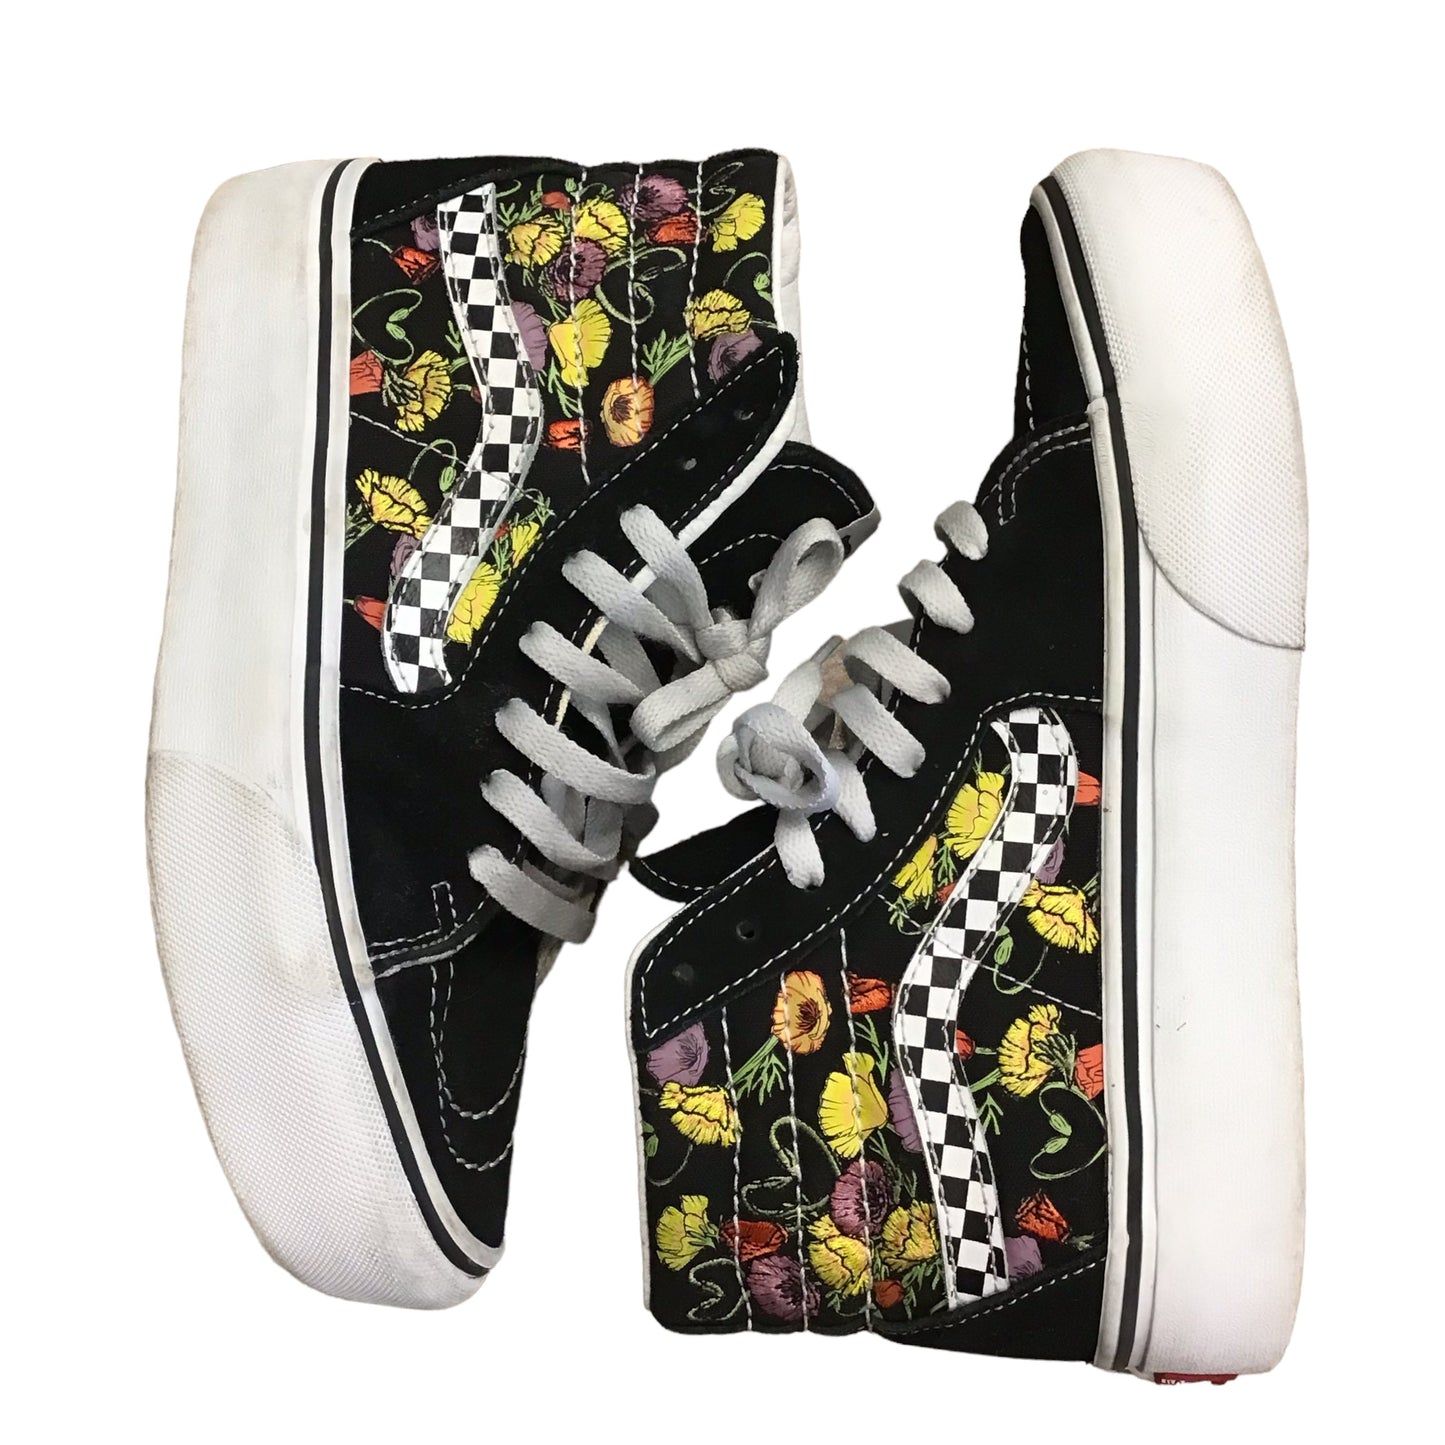 Shoes Sneakers Platform By Vans  Size: 6.5